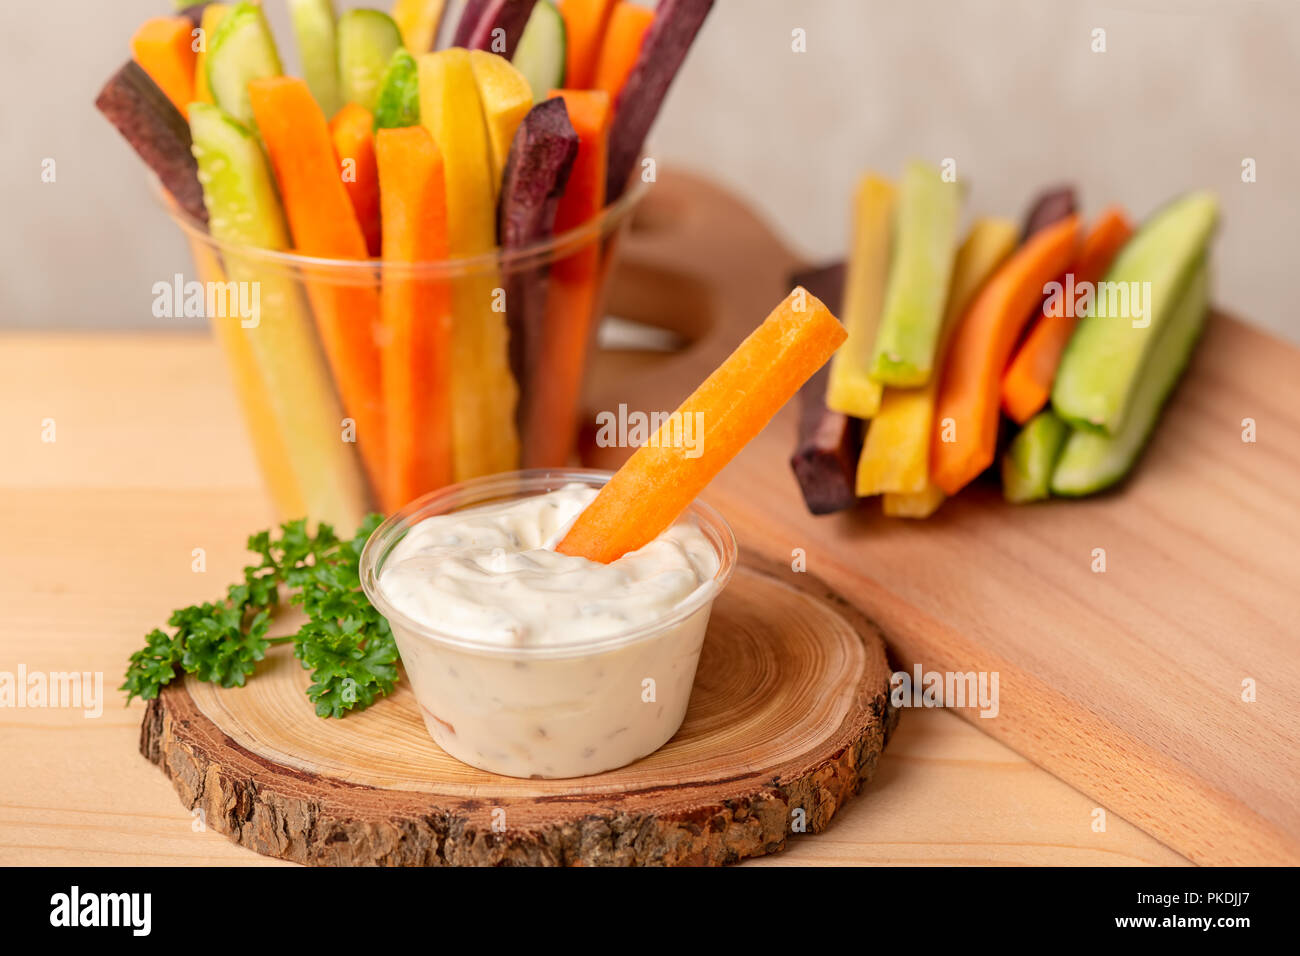 colorful carrots and cucumbers julienne mixed and sour cream dip on wooden board, concept of healthy eating Stock Photo